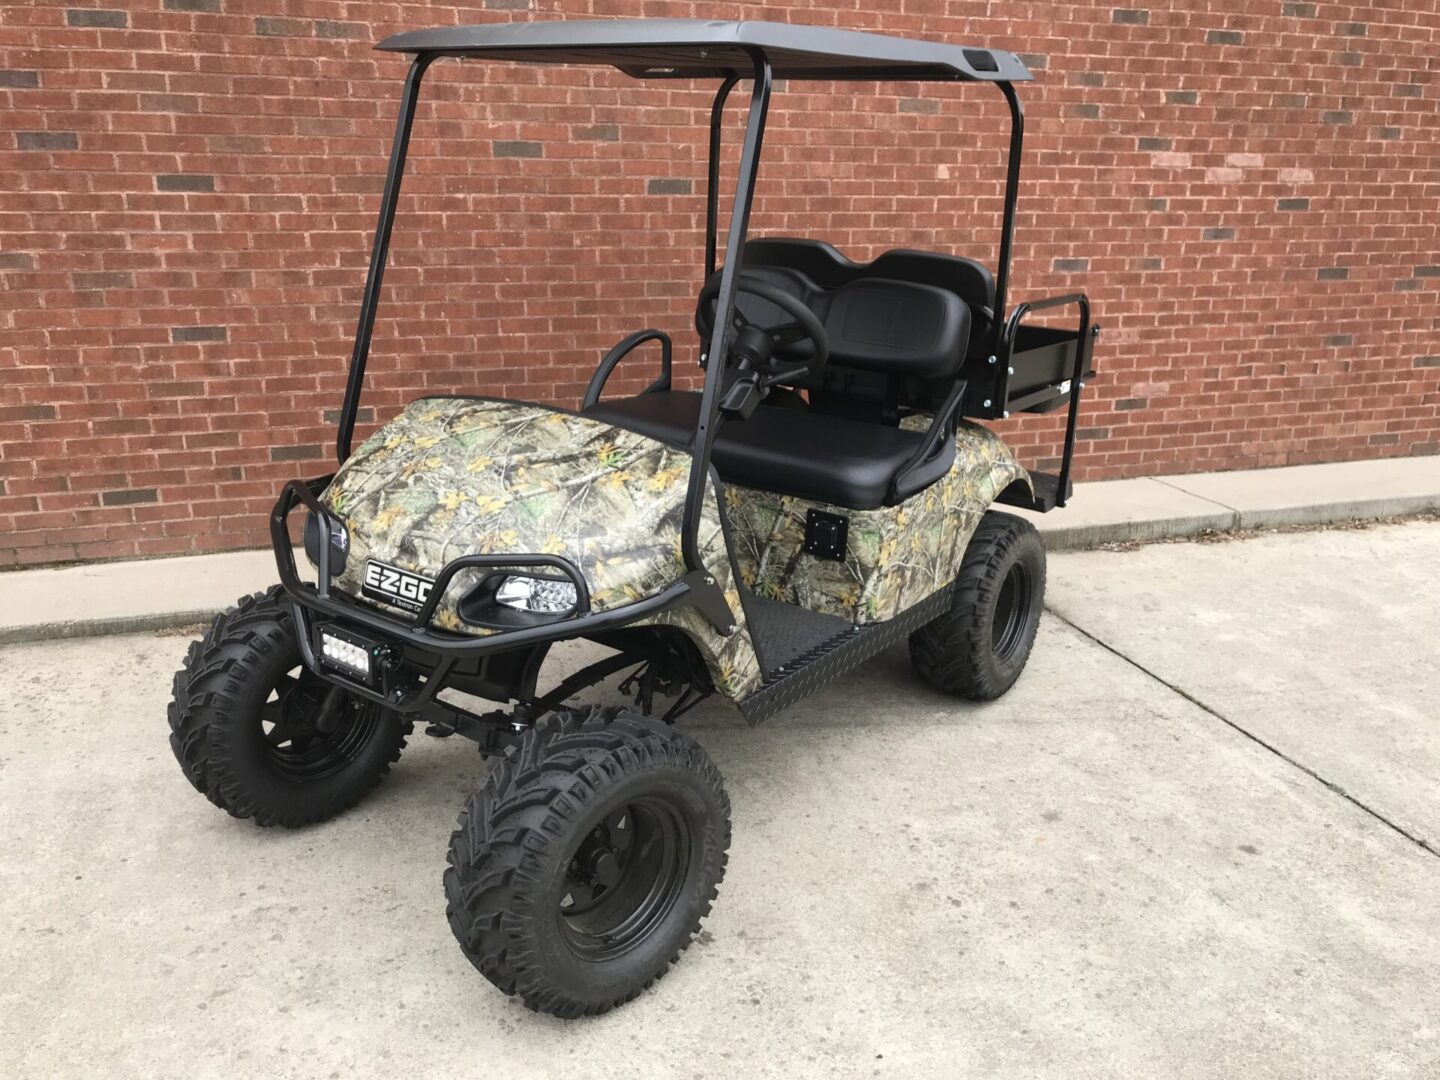 A golf cart with camouflage paint parked in front of a brick wall.